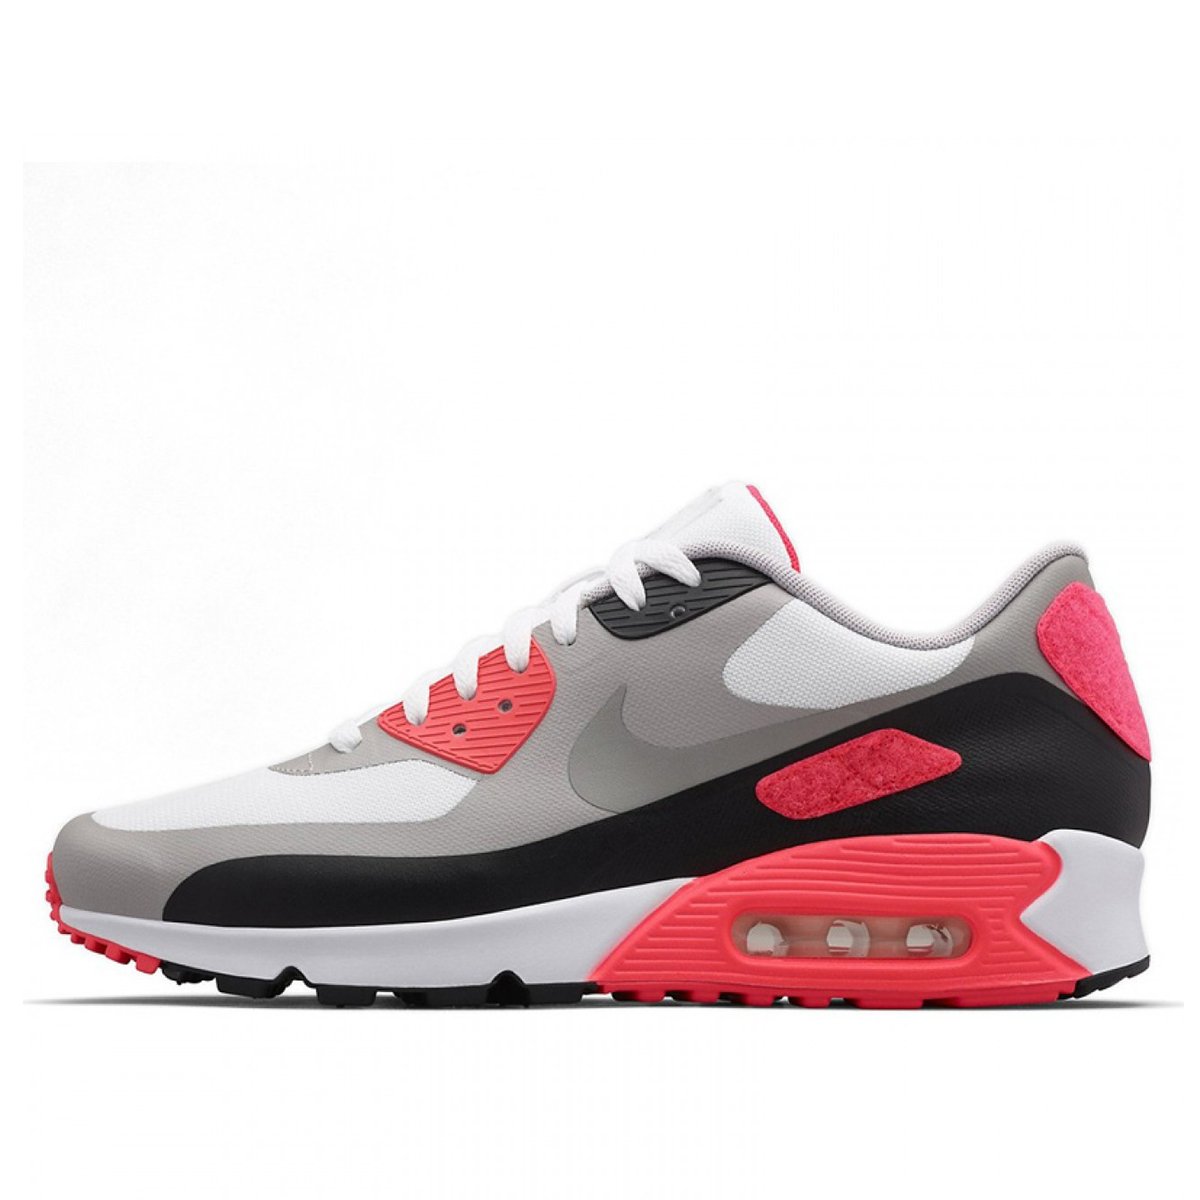 Air Max 90 SP Infrared "Patch" 746682-106 | FLEXDOG